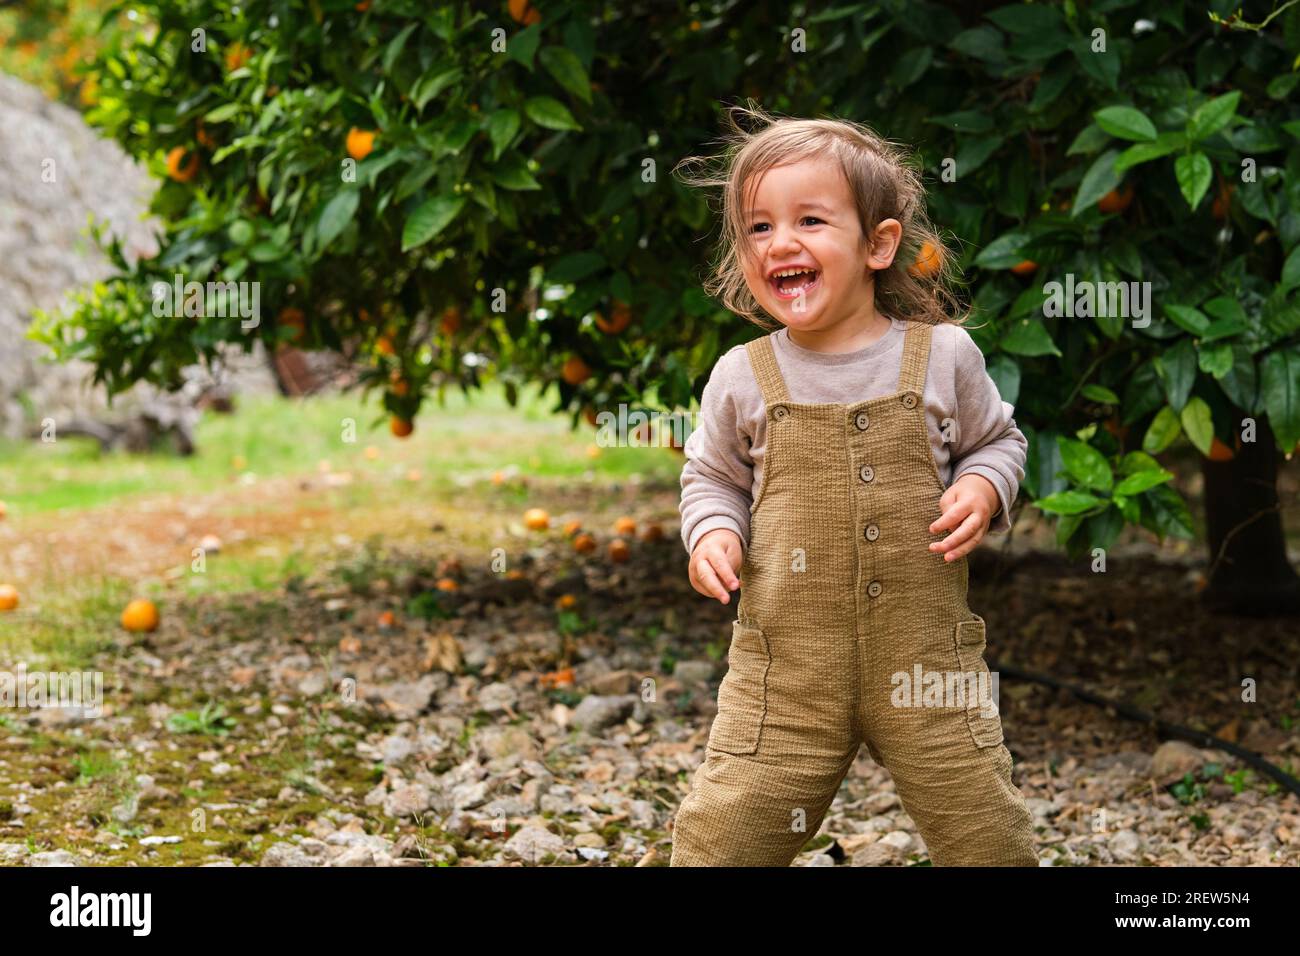 Content child in overalls laughing on pebble terrain and looking away against lush tree with oranges in countryside Stock Photo